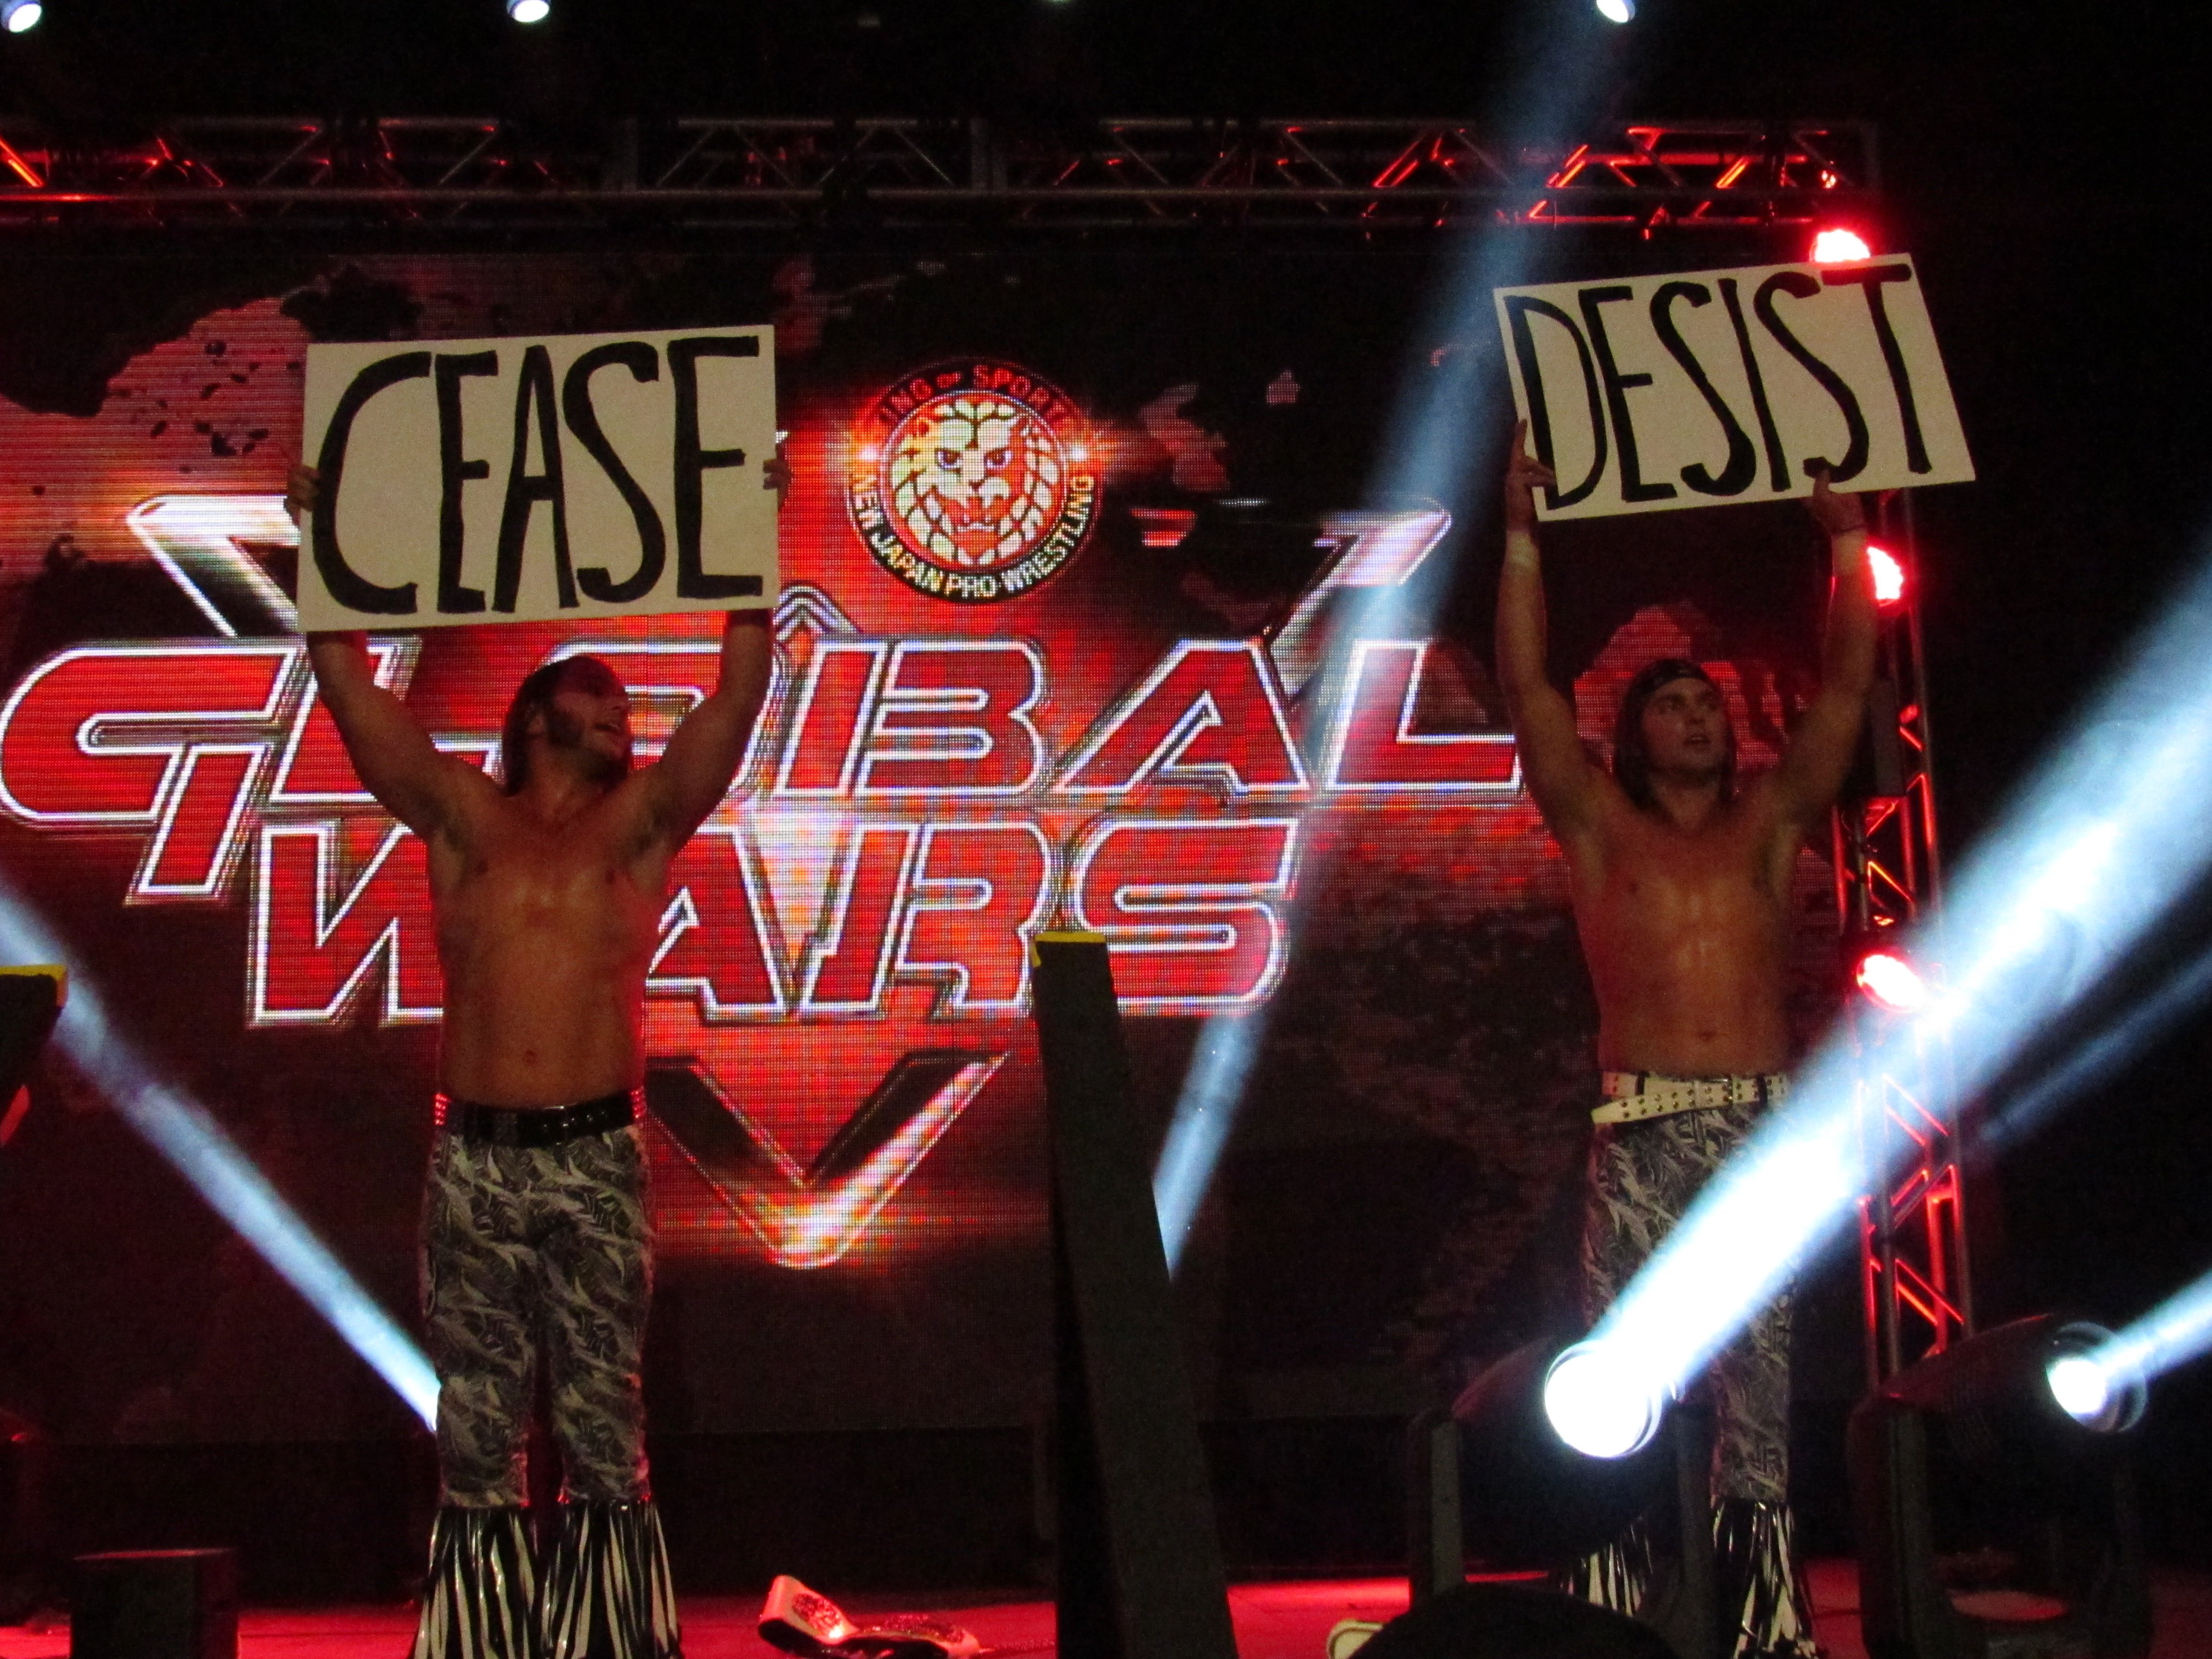 Young Bucks Allude To #BCInvasion Inspiring #UnderSiege?, Last Day To Buy One WWE Tee & Get One For $1